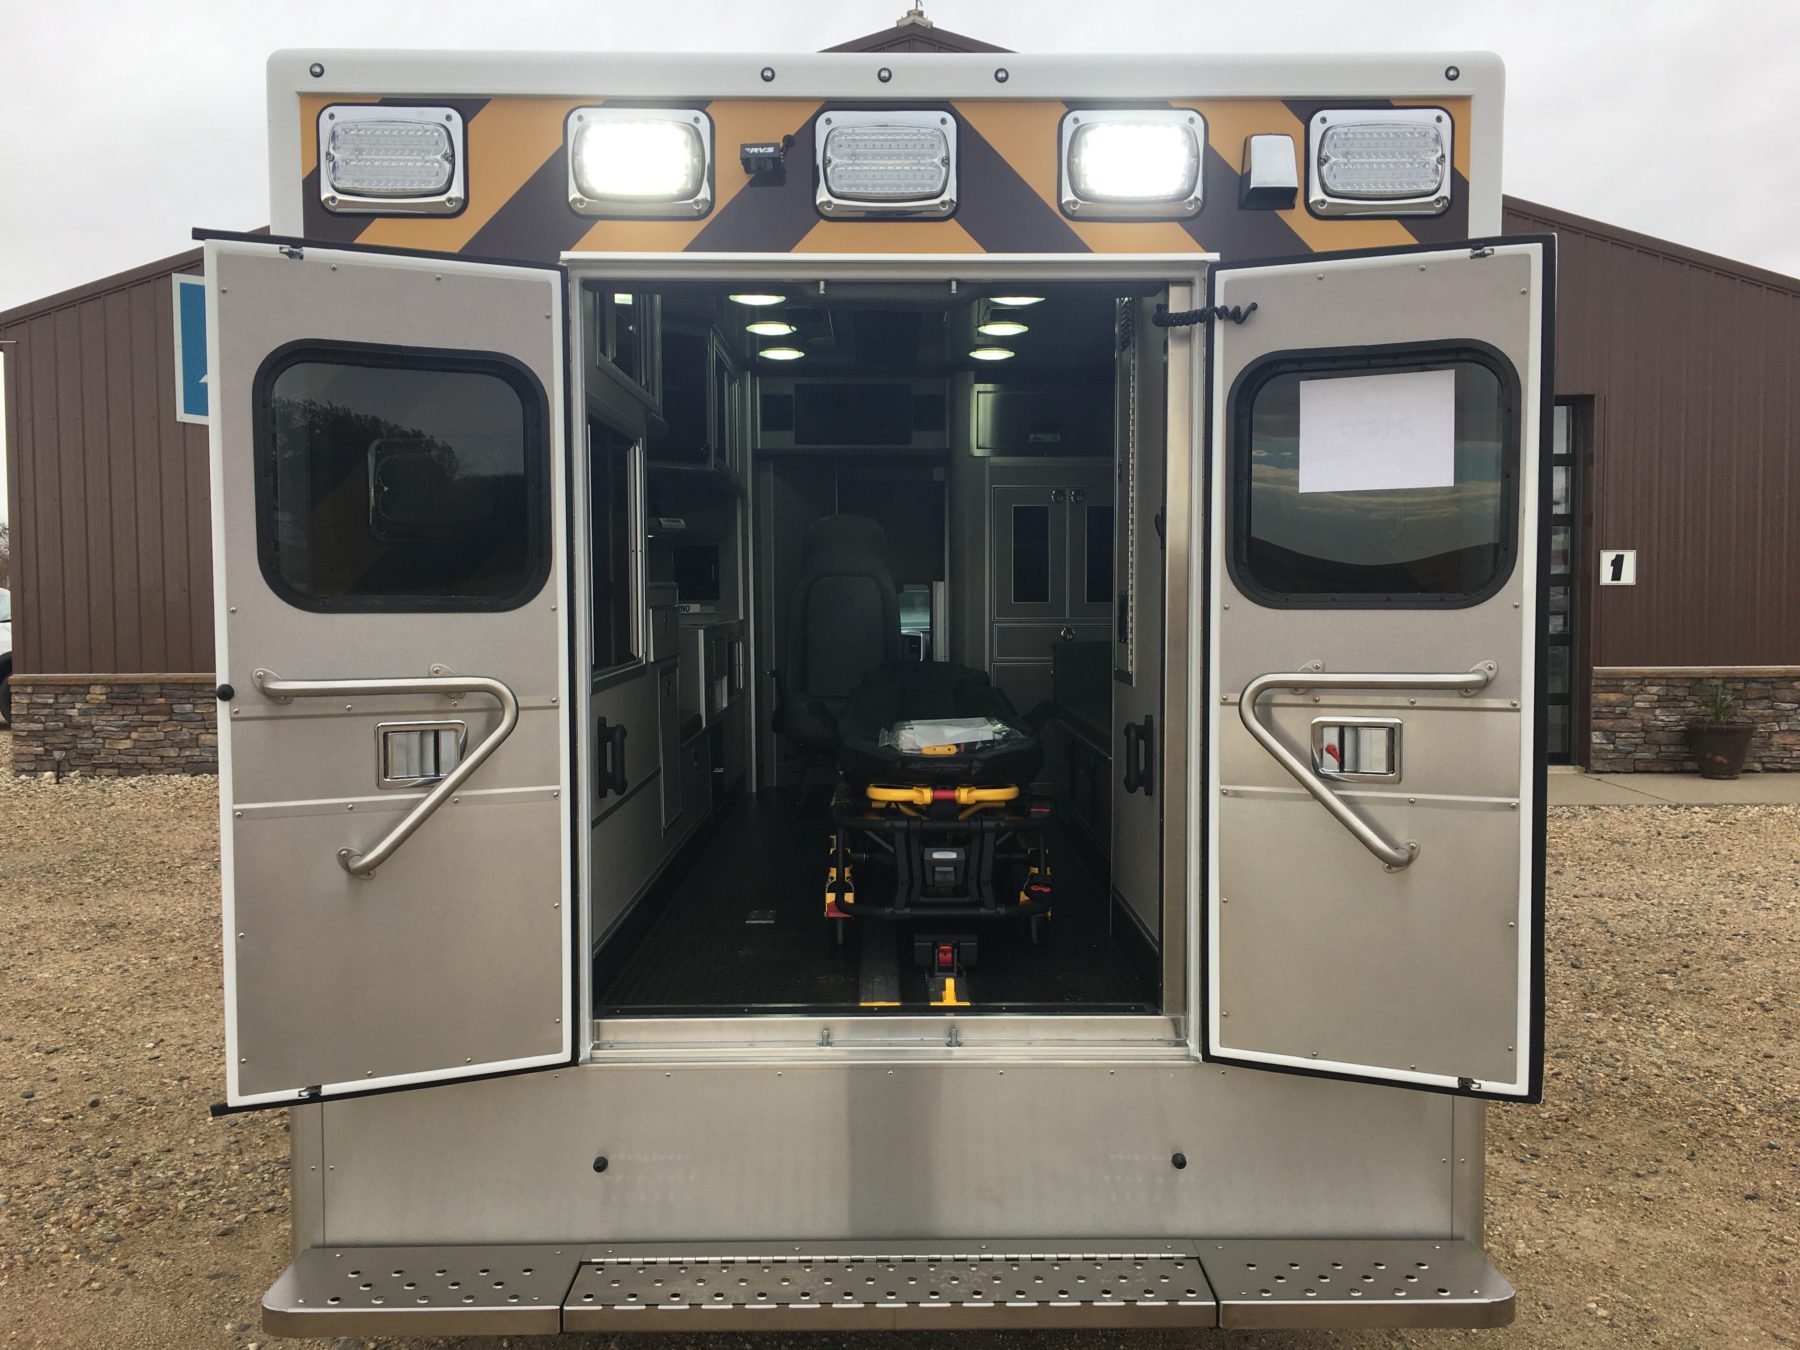 2019 Ram 4500 4x4 Heavy Duty Ambulance For Sale – Picture 10